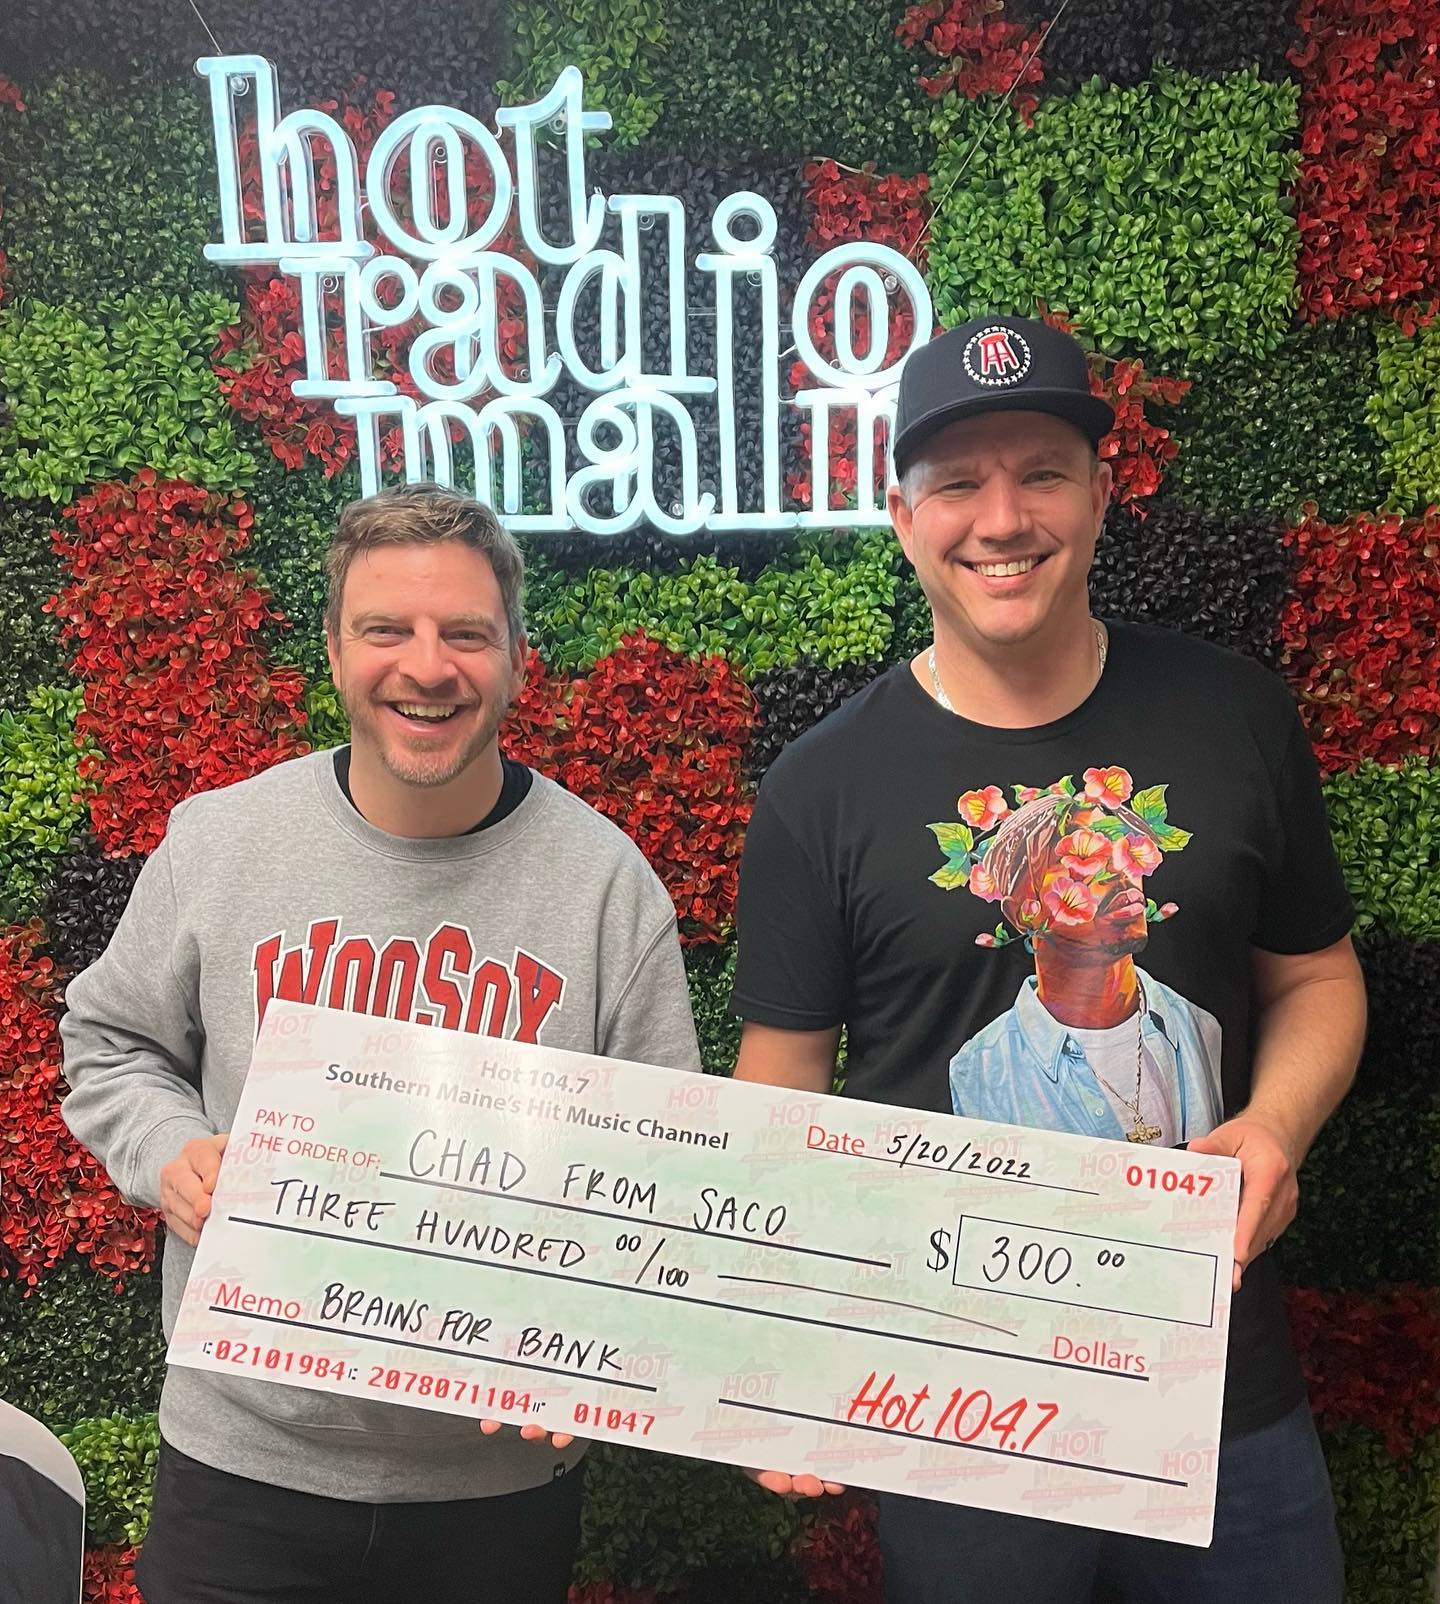 Shout out to Chad from Saco - He just picked up his $300 #BrainsForBank prize! Next chance to play is coming up at 5pm with @aullthat & it’s made Hot in Maine by @leeautomalls 🧠🏦#MaineMadeWinners